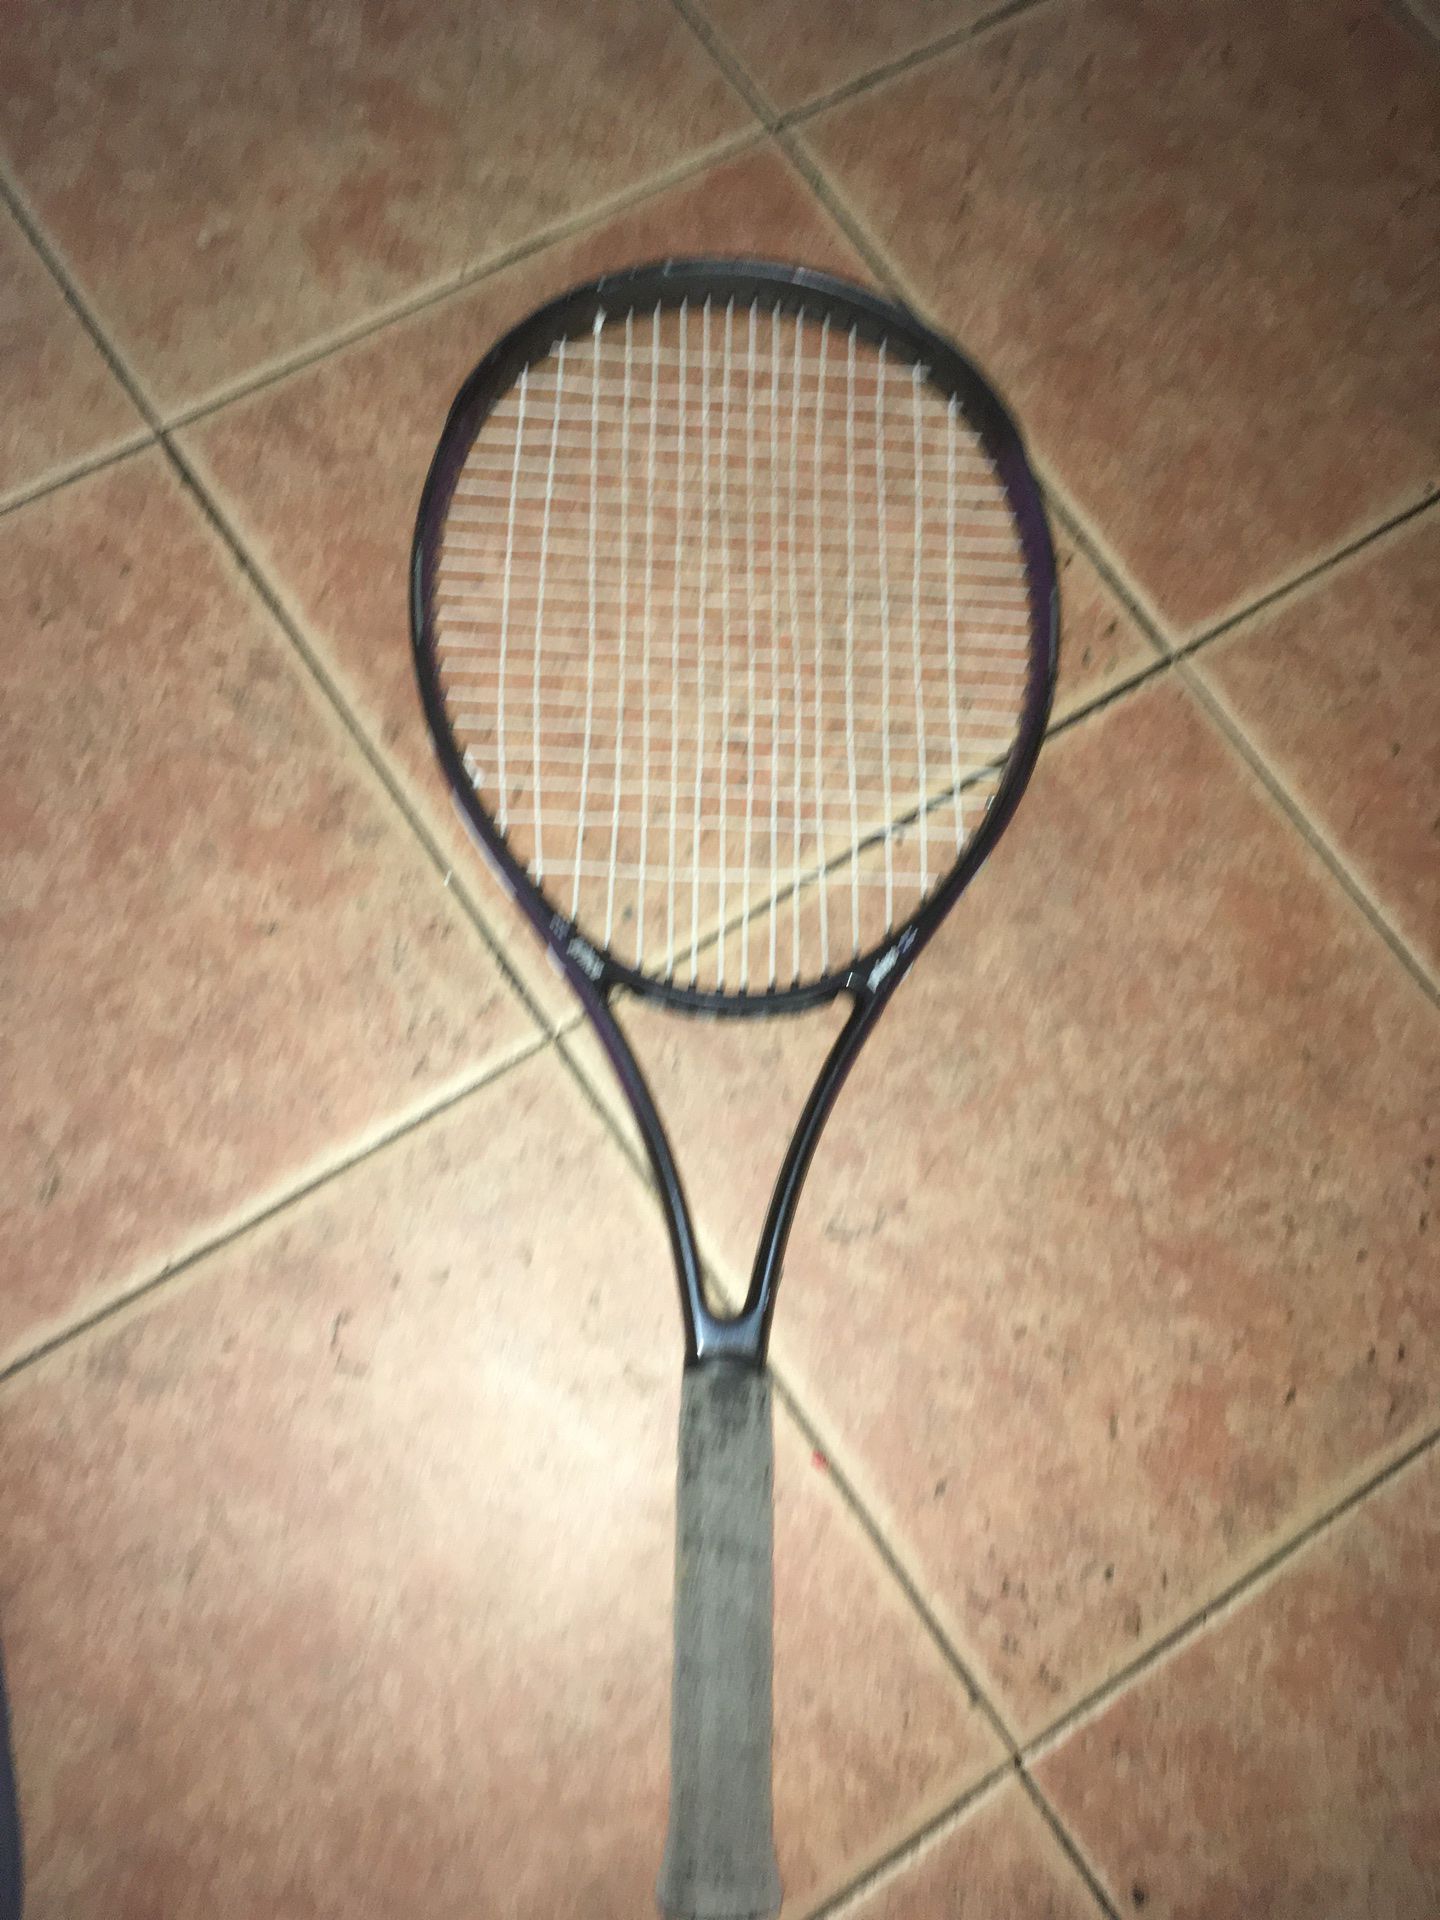 Prince CTS synergy 31 oversize tennis racket